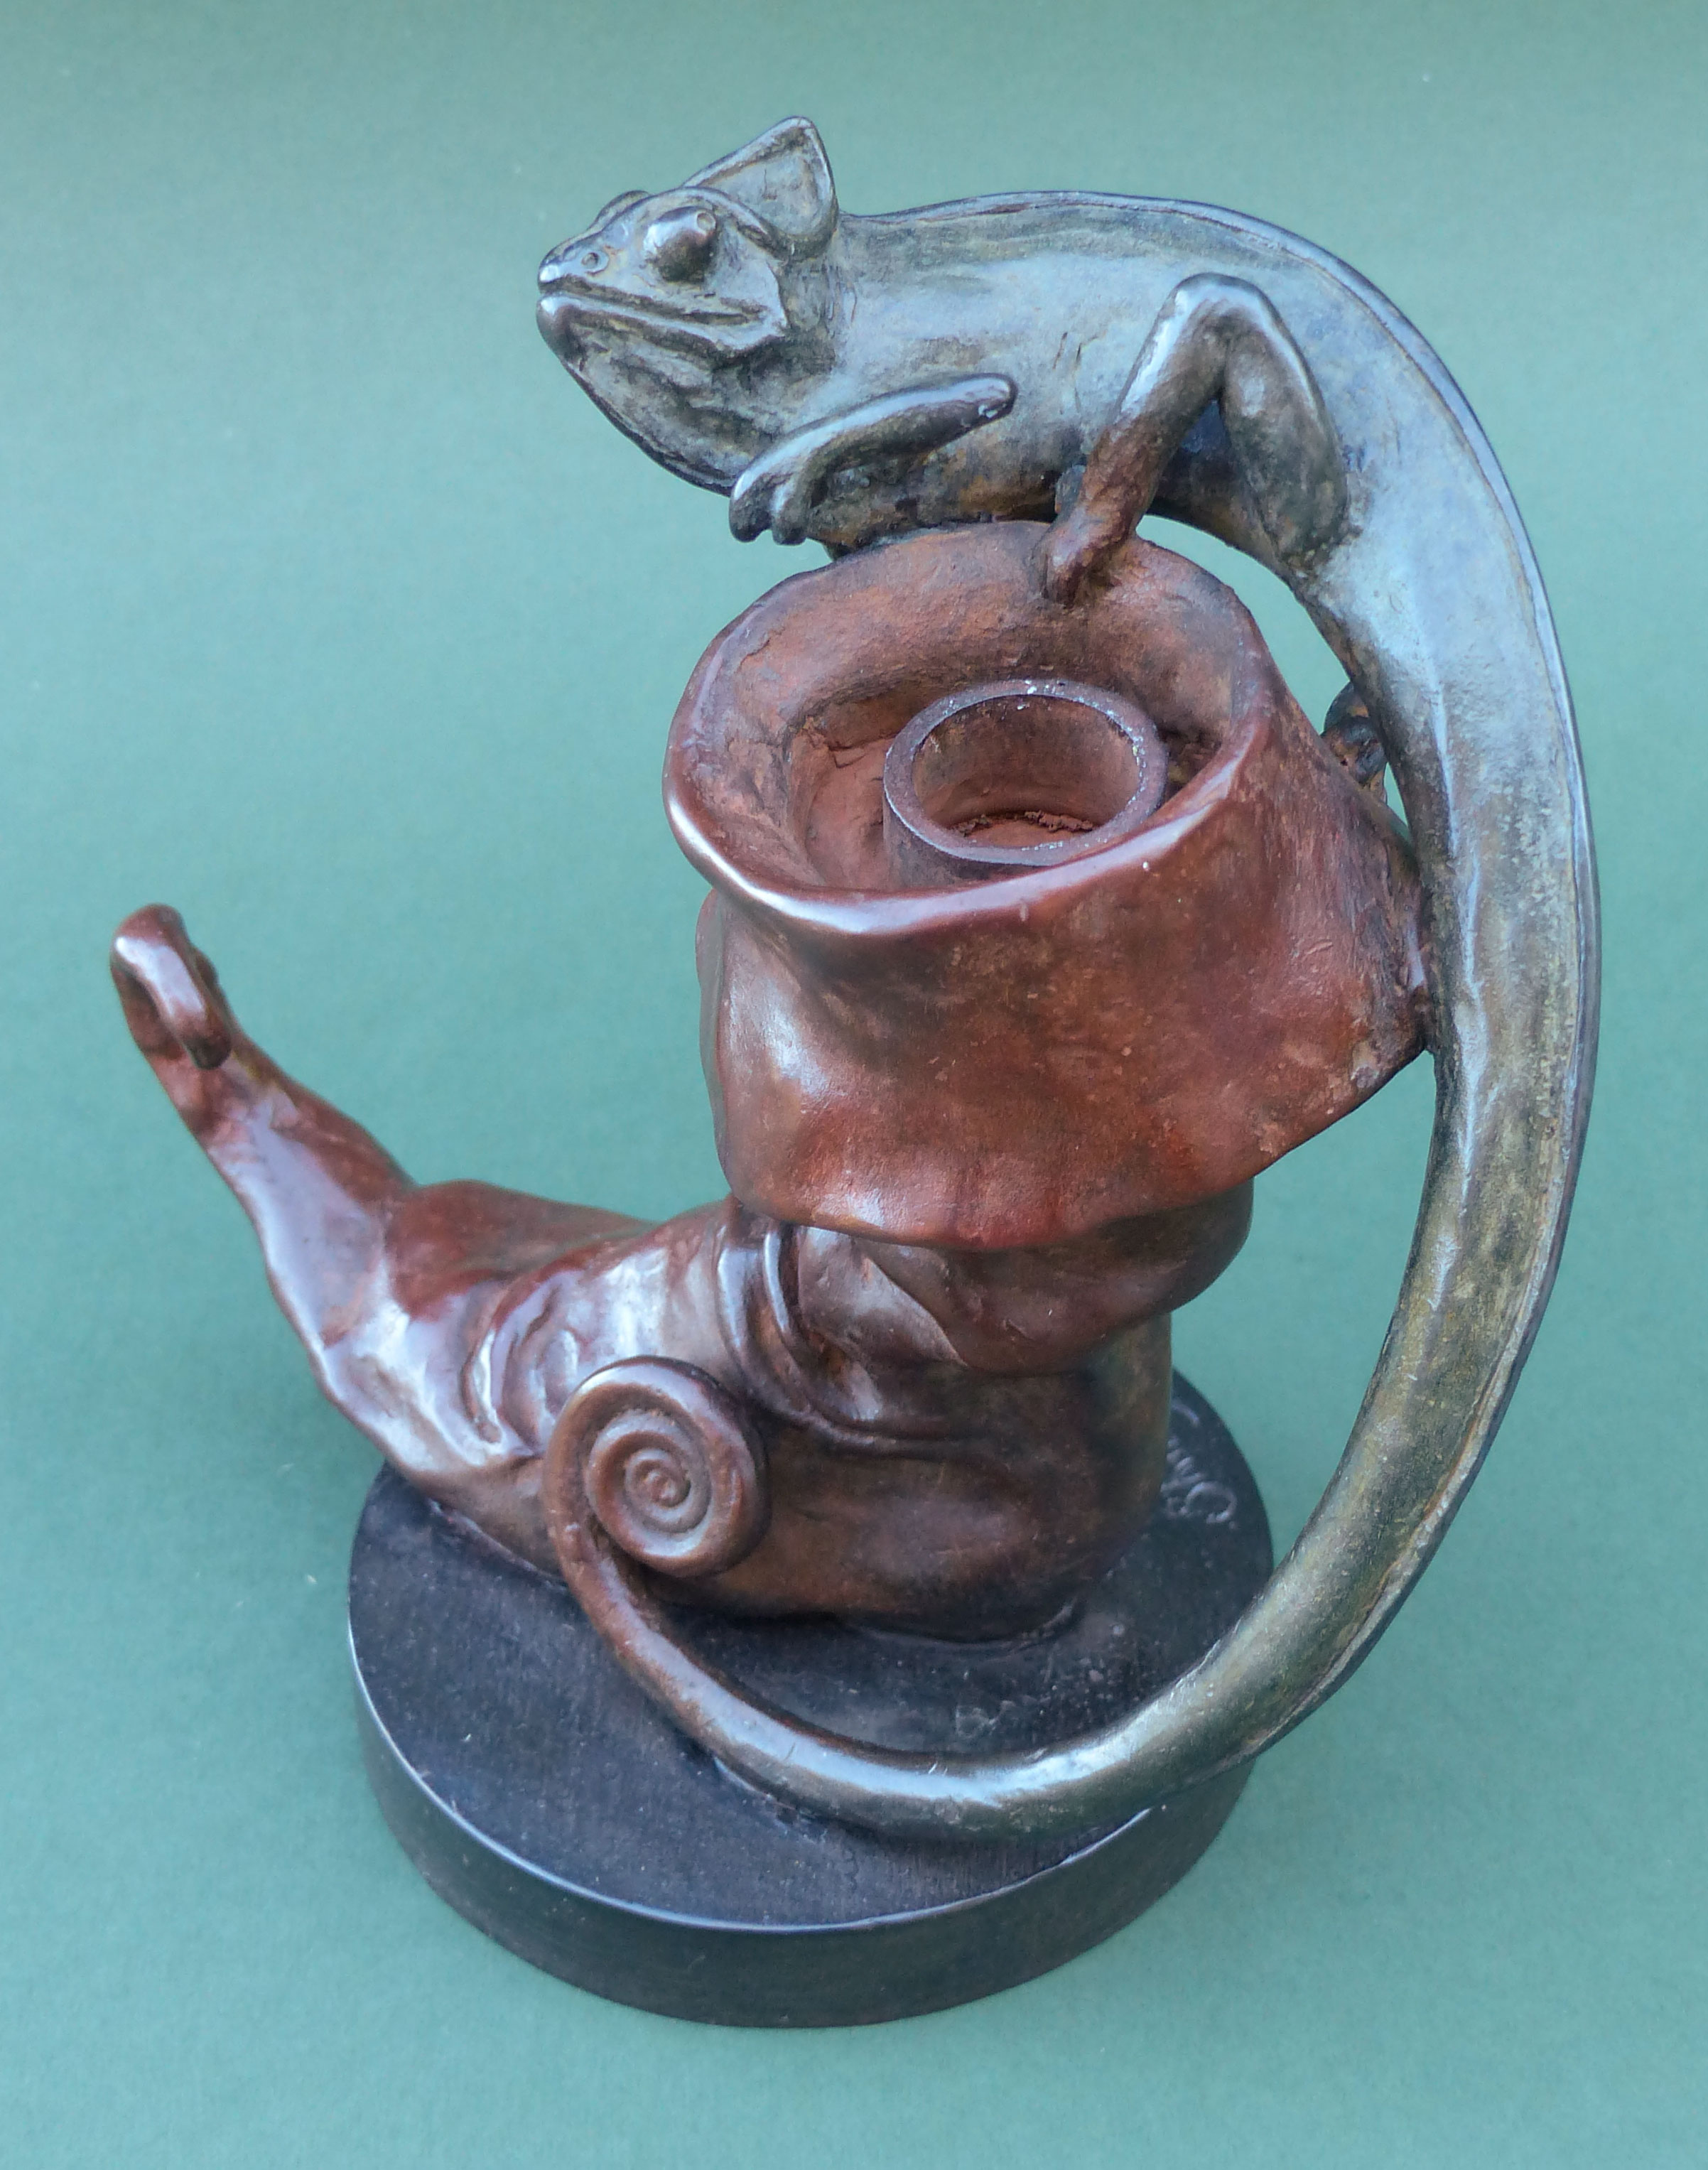 Boot and chameleon candlestick